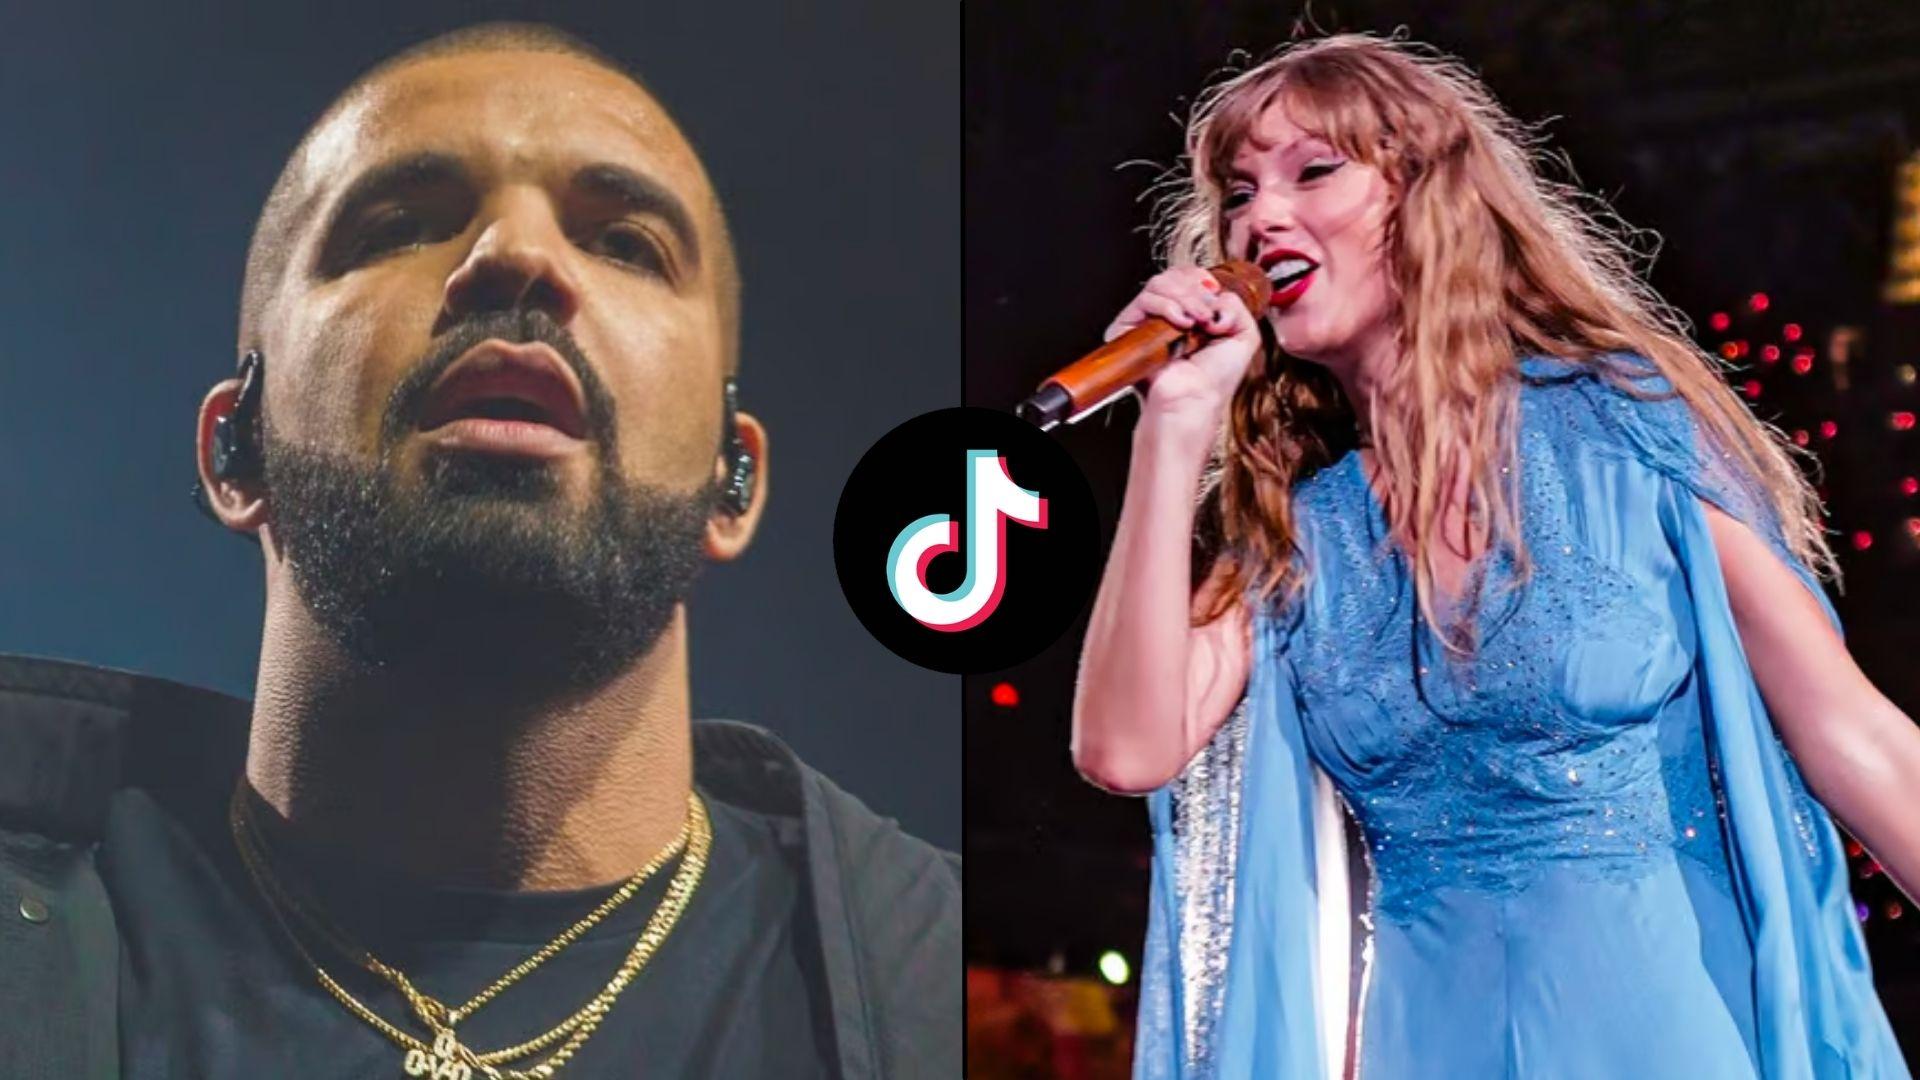 Taylor Swift and Drake side-by-side next to TikTok logo